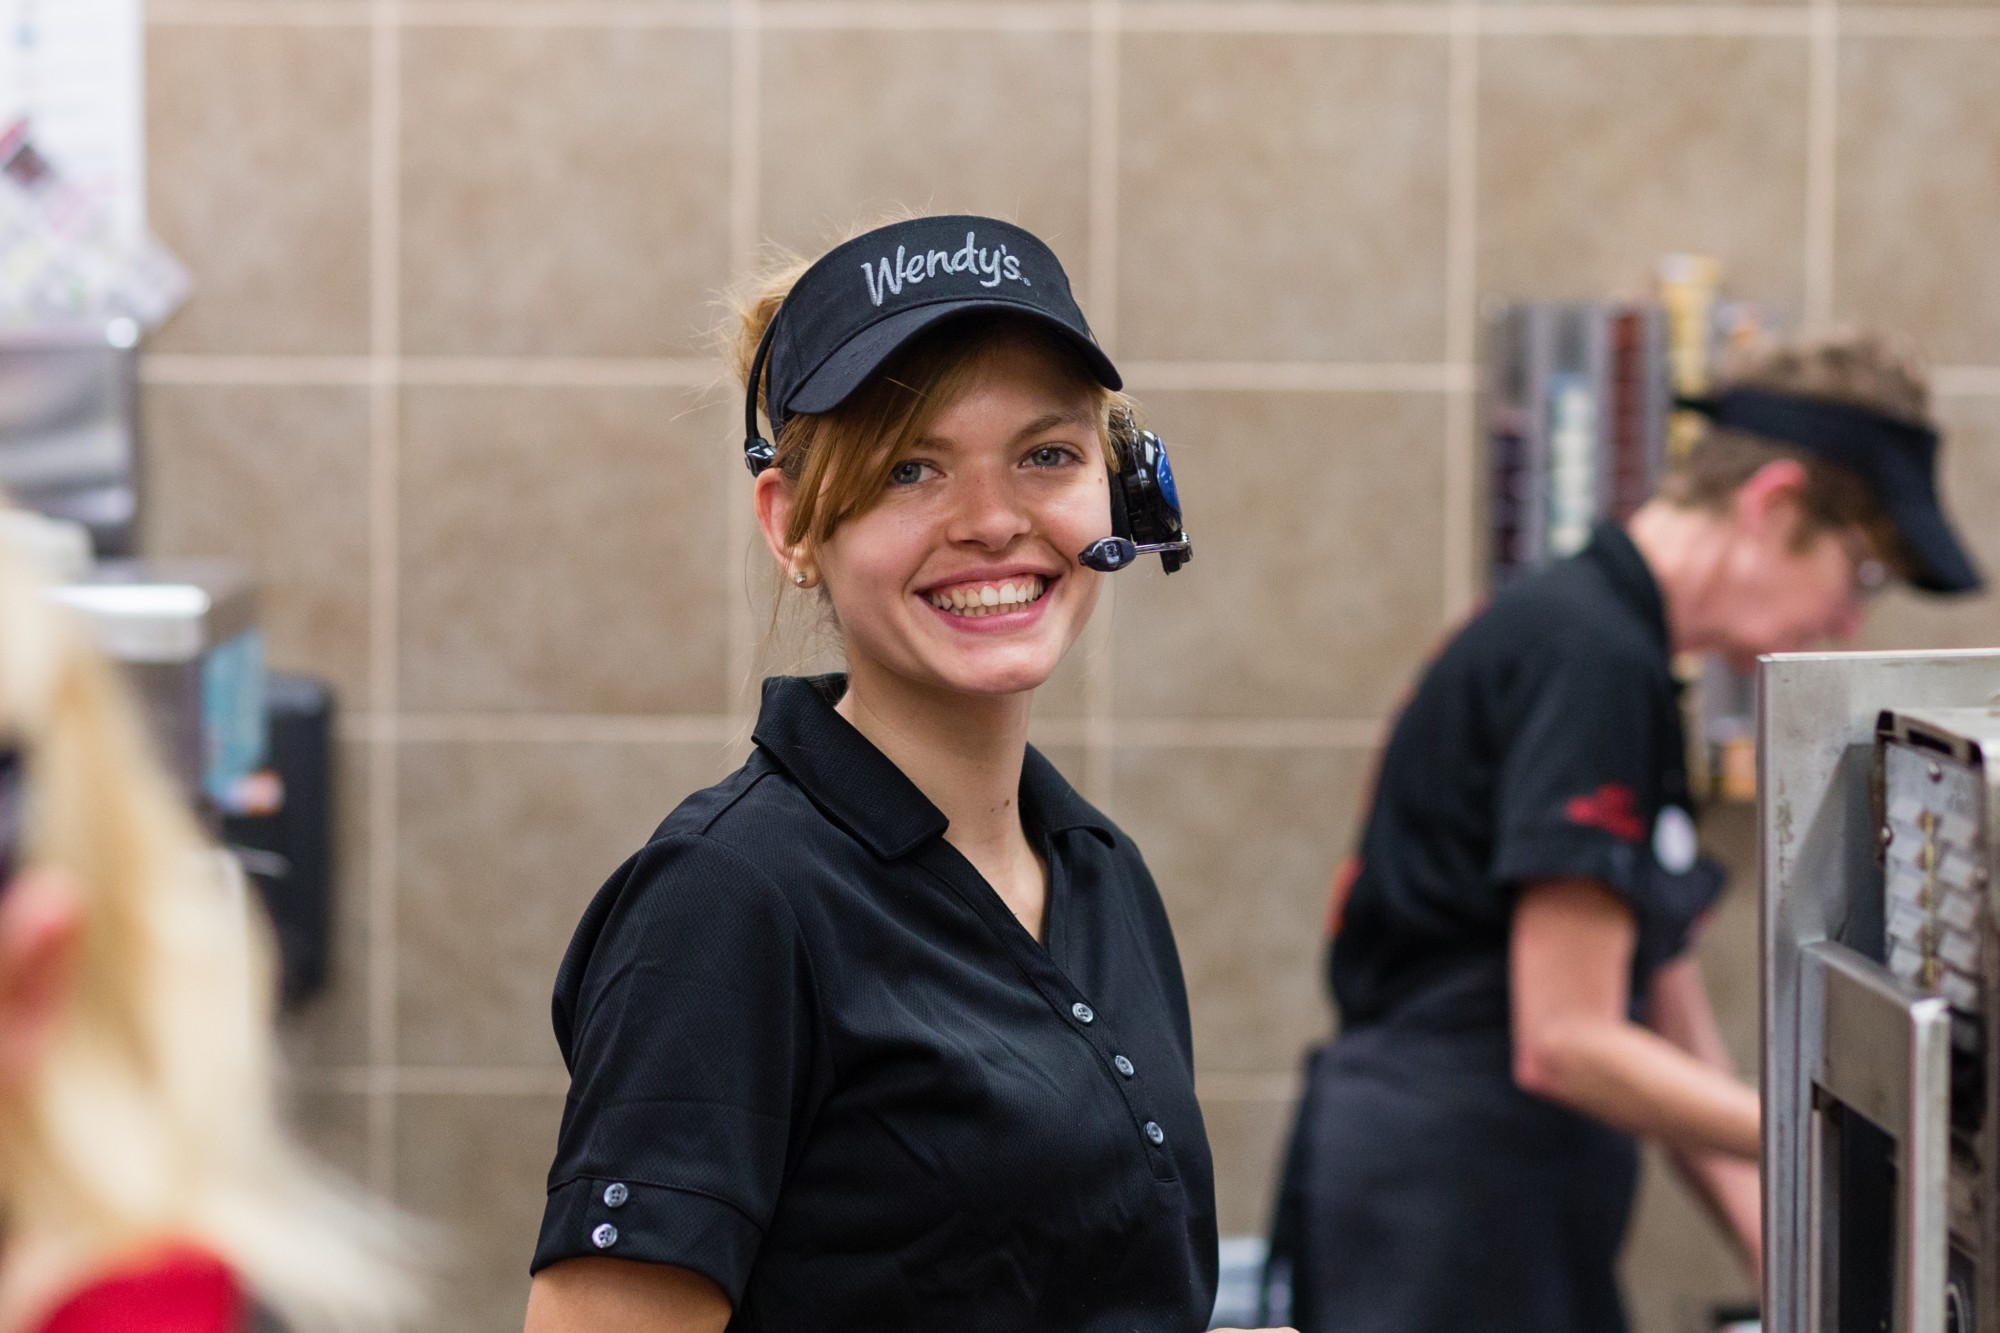 manager jobs, wenco, wendy's